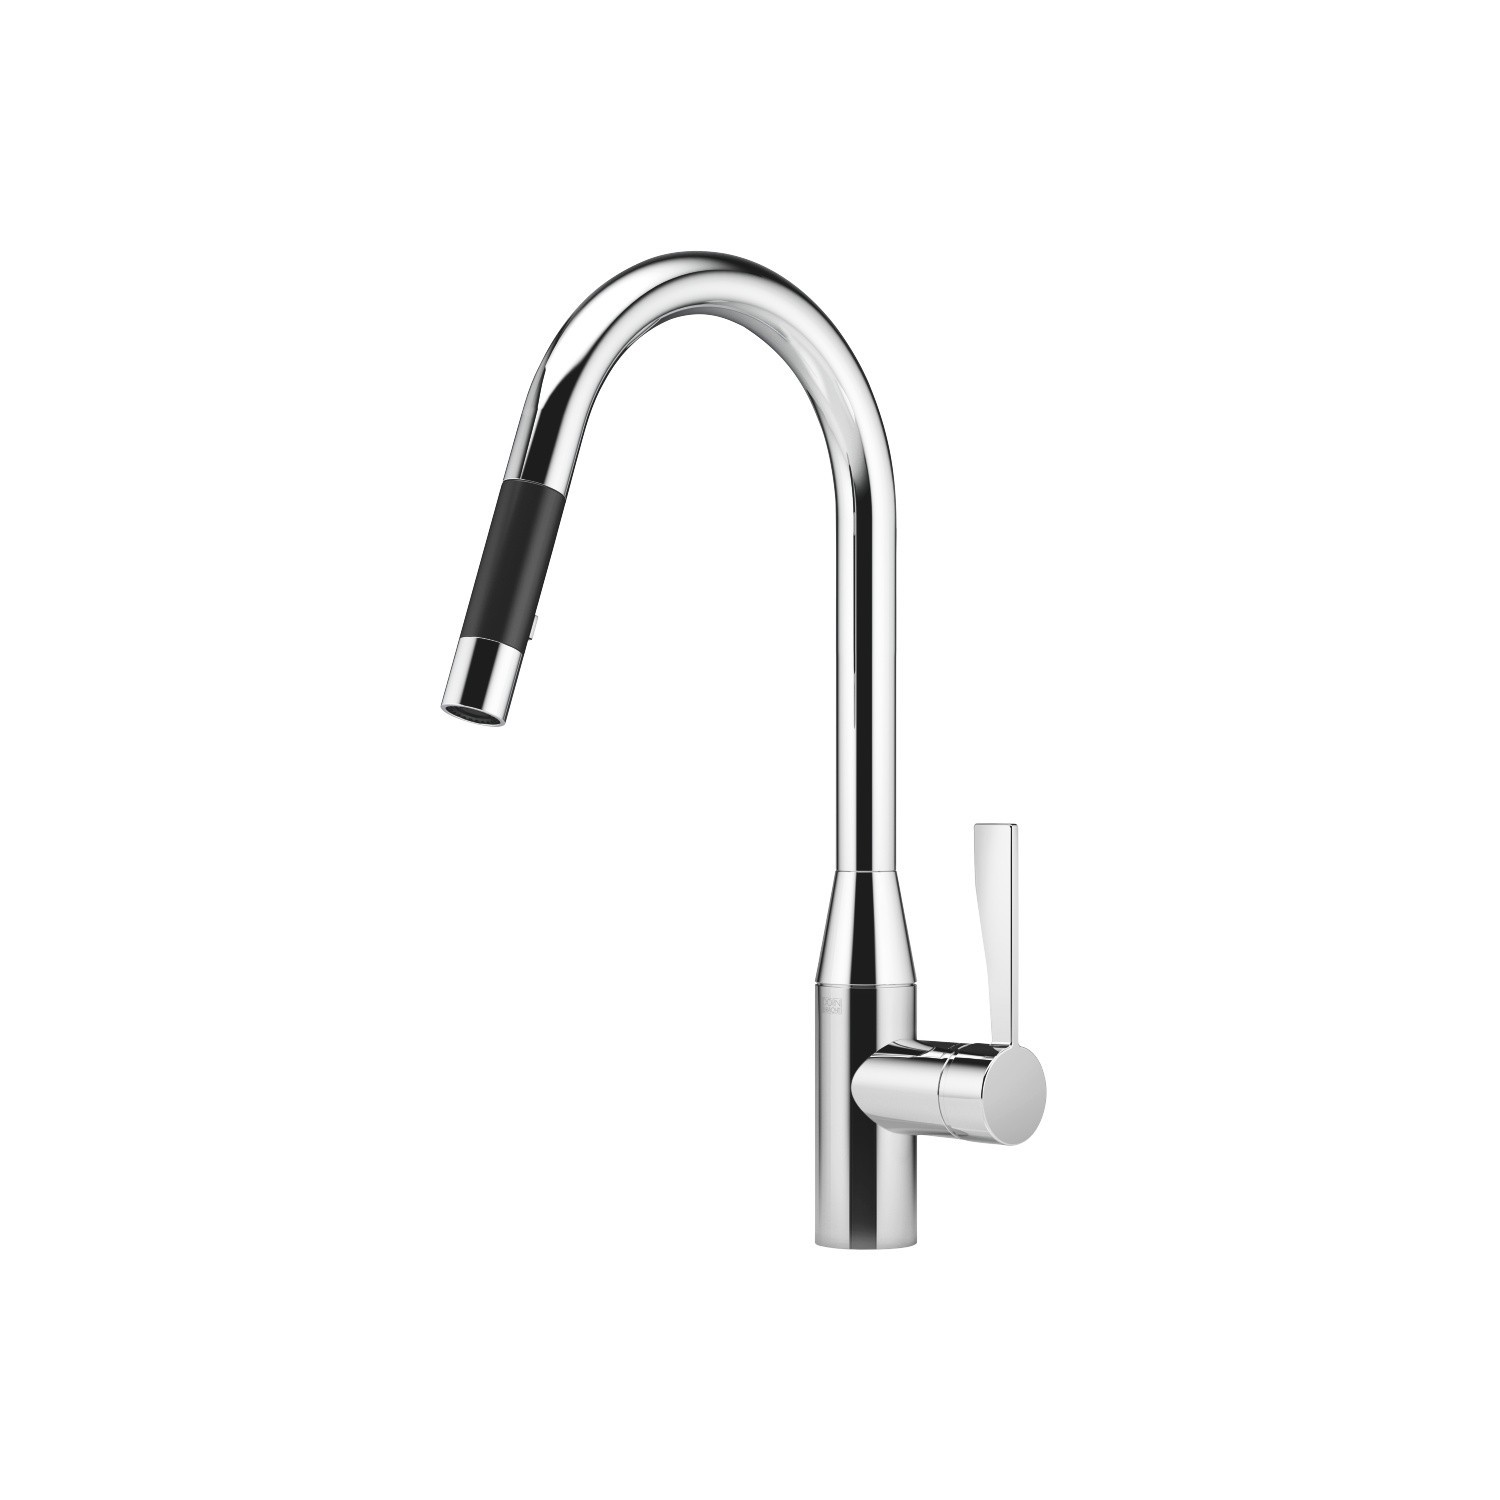 DORNBRACHT 33870895-0010 SYNC SINGLE HOLE DECK MOUNT PULL DOWN KITCHEN FAUCET WITH SPRAY FUNCTION AND LEVER HANDLE